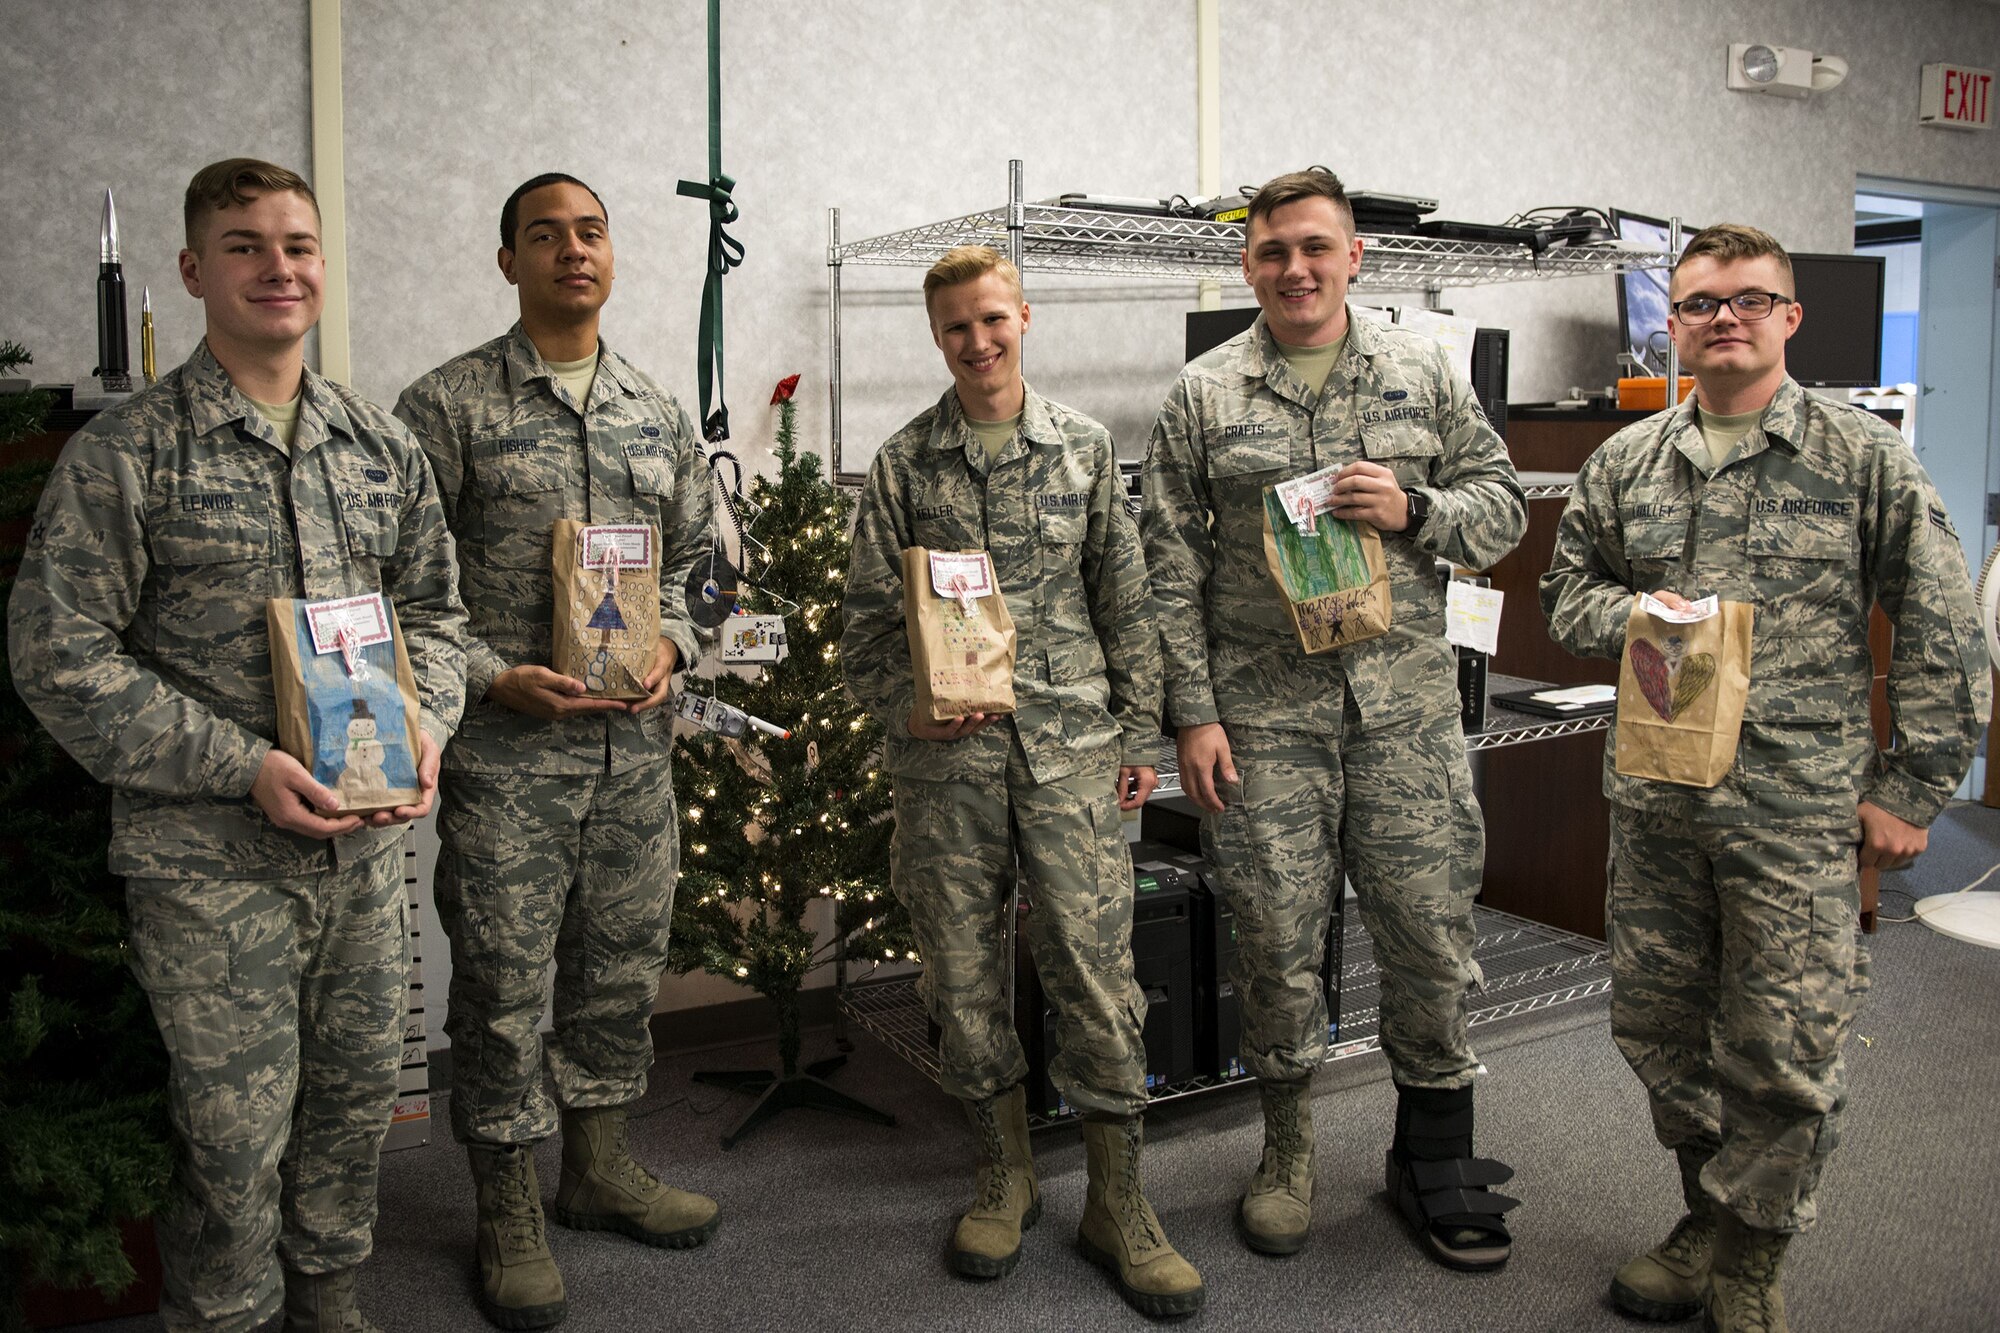 Airmen assigned to the 23d Communications Squadron pose for a photo during the Annual Moody Airmen Cookie Drive, Dec. 5, 2017, at Moody Air Force Base, Ga. Local organizations, Airmen and spouses donated more than 8,000 cookies to approximately 700 dorm residents to show appreciation for the Airmen during the holidays. (U.S. Air Force photo by Airman 1st Class Erick Requadt)